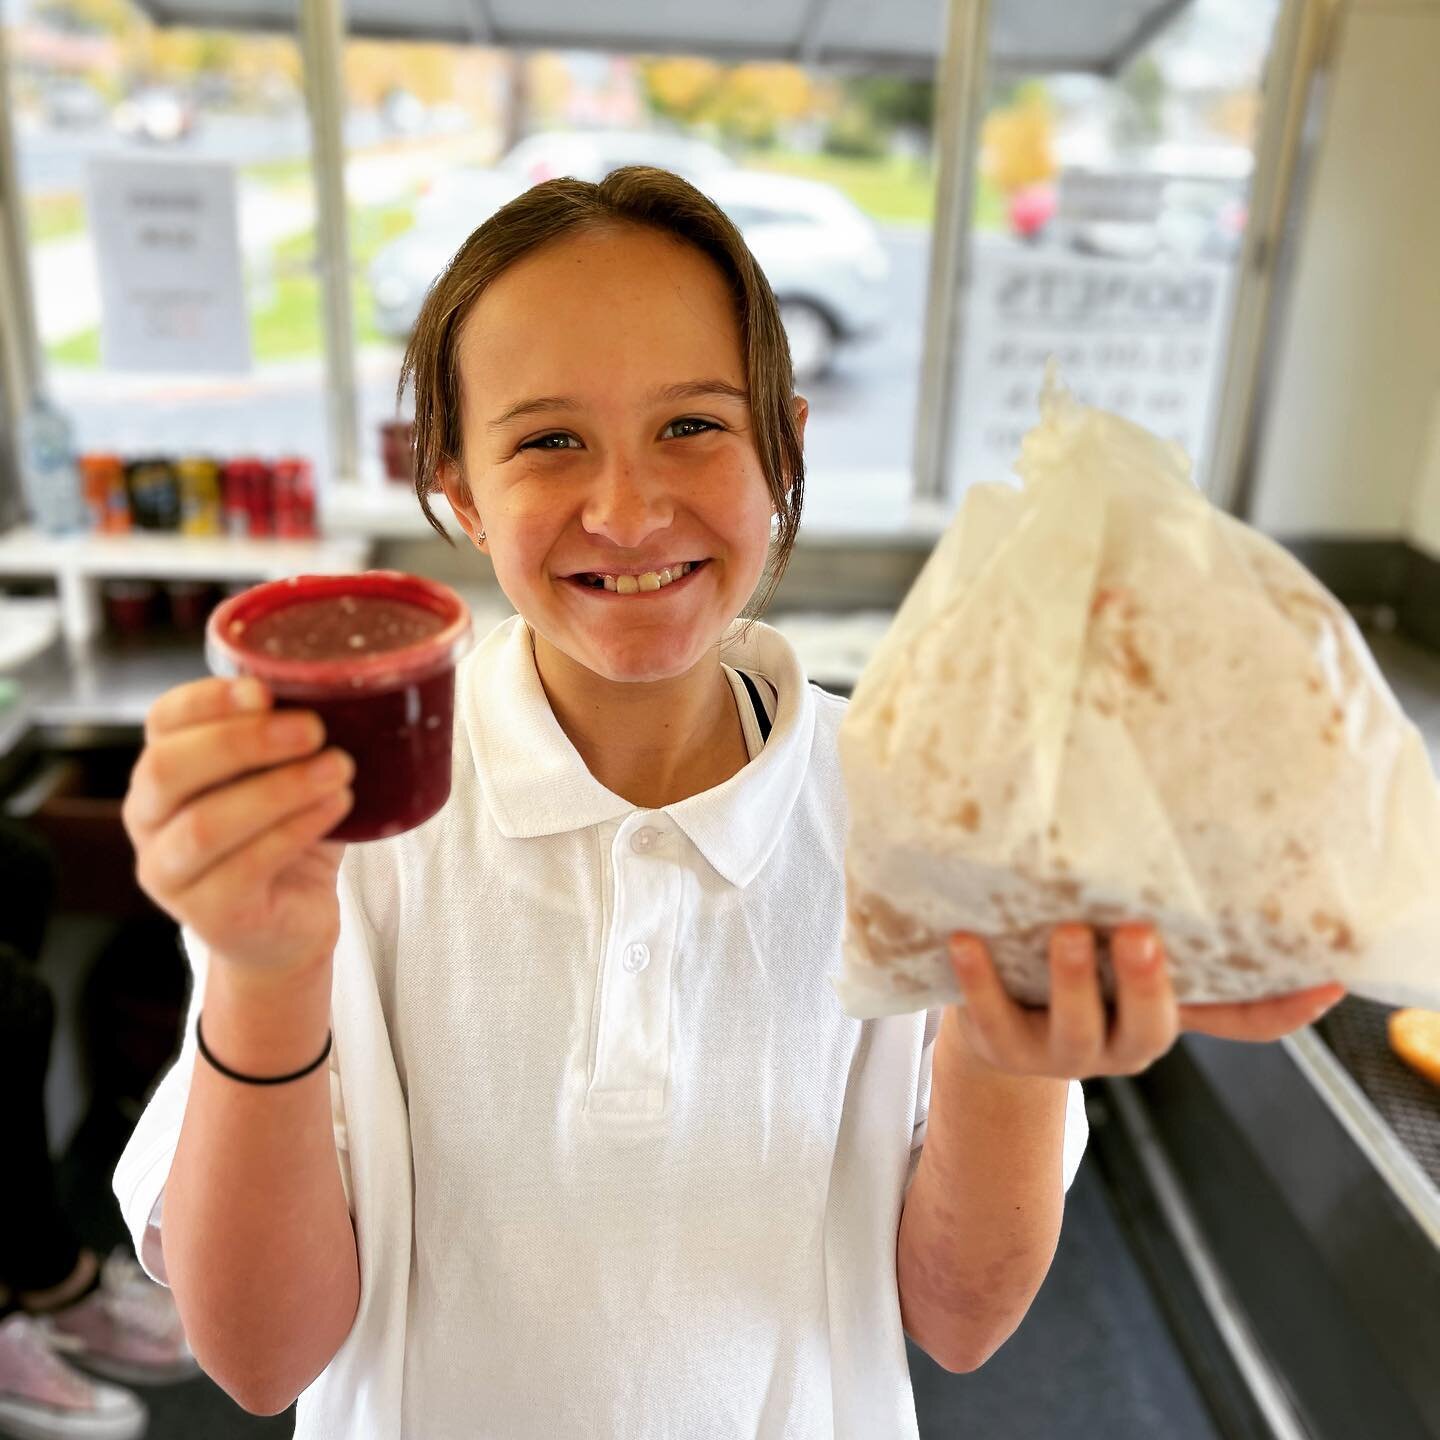 School holidays opening hours ⬇️

📍Lake Weeroona

Wednesday 👉 8:30am - 4pm
Thursday 👉 8:30am - 4pm
Friday 👉 8:30am - 5:30pm

🚨Buy 5 donuts and get the 6th FREE!!

Cash and card accepted! 

#lakeweeroona #lakeweeroonabendigo #lakeweeroonaplaygrou